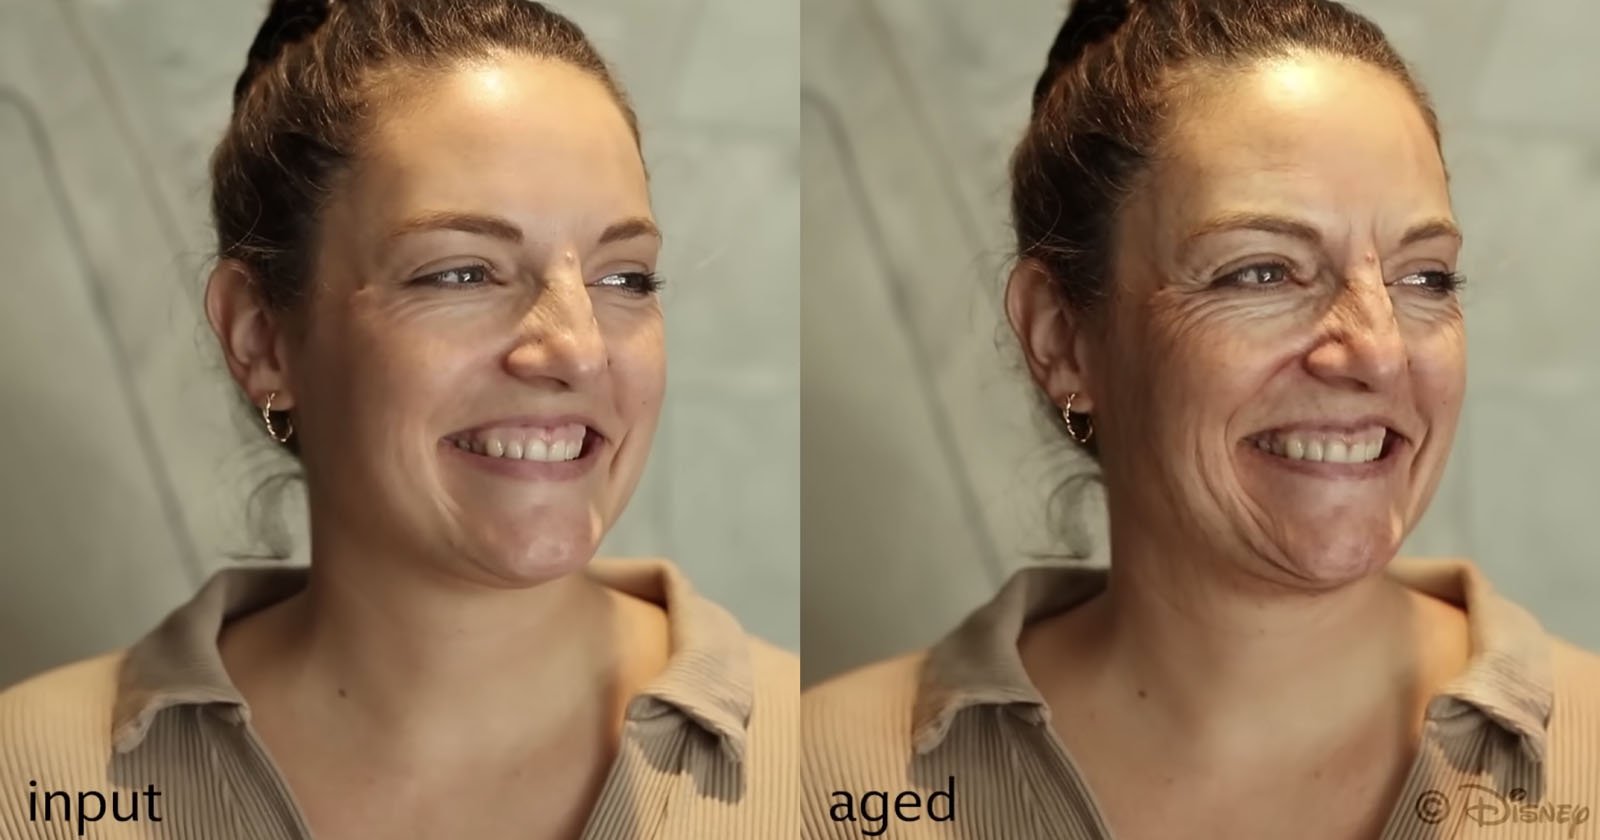 Disney’s New AI Software Can Easily Make Actors Look Younger or Older